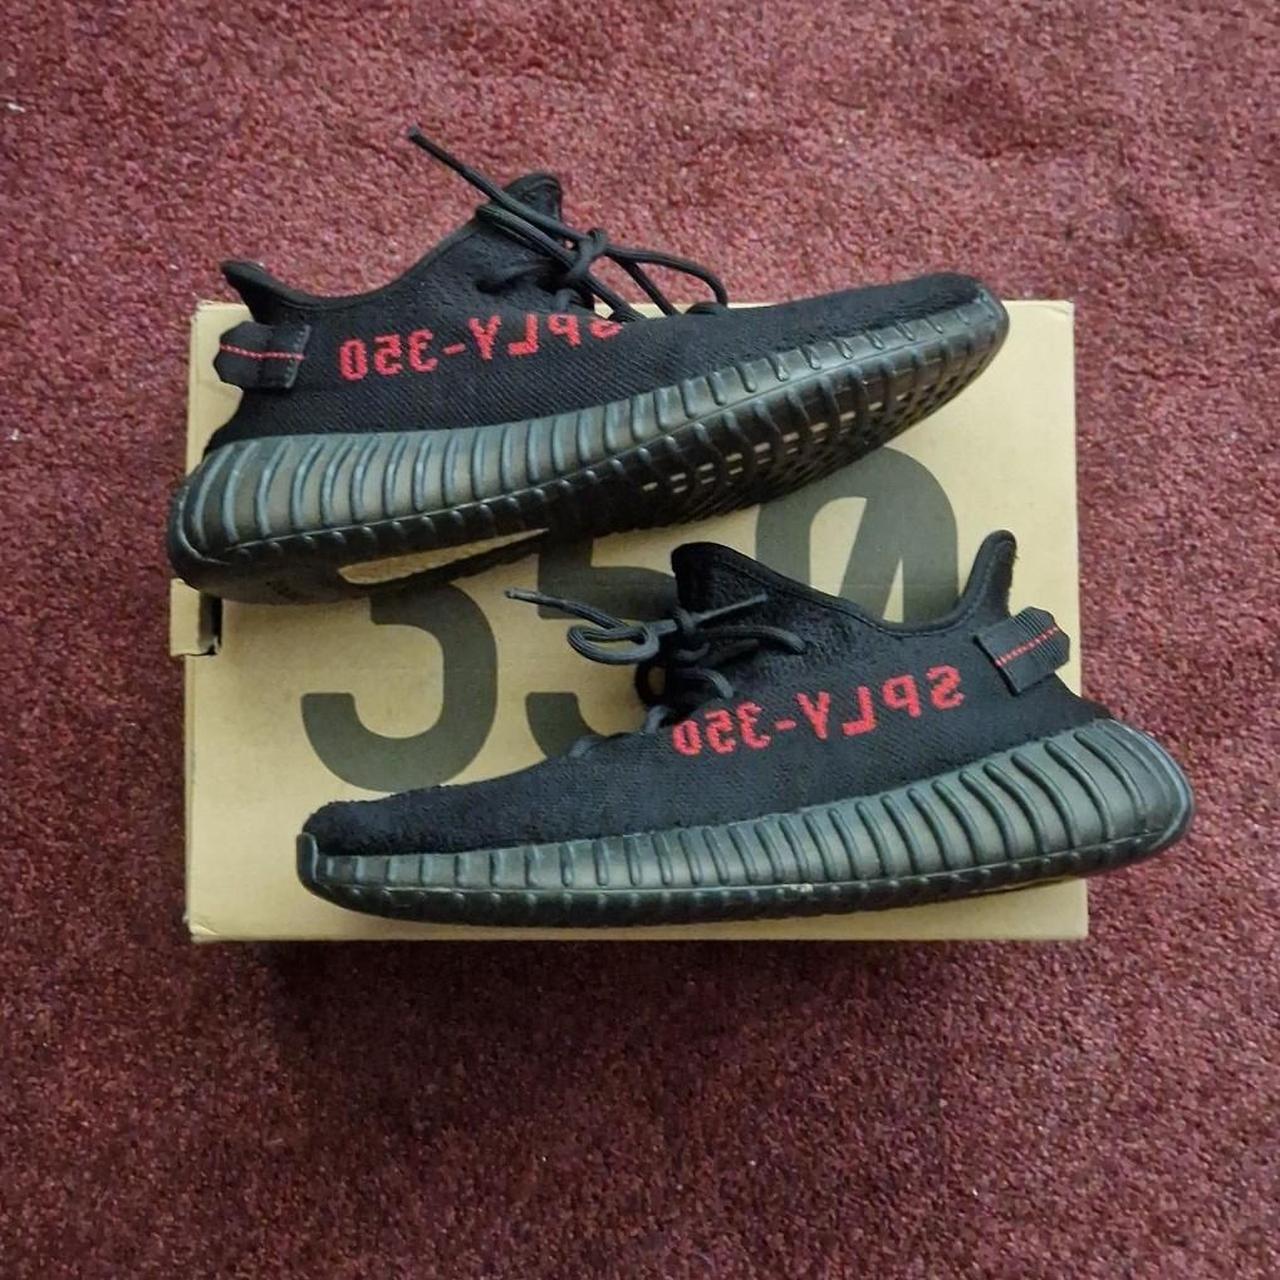 Yeezy Boost 350 v2 bred Size 9.5uk used but in good... - Depop